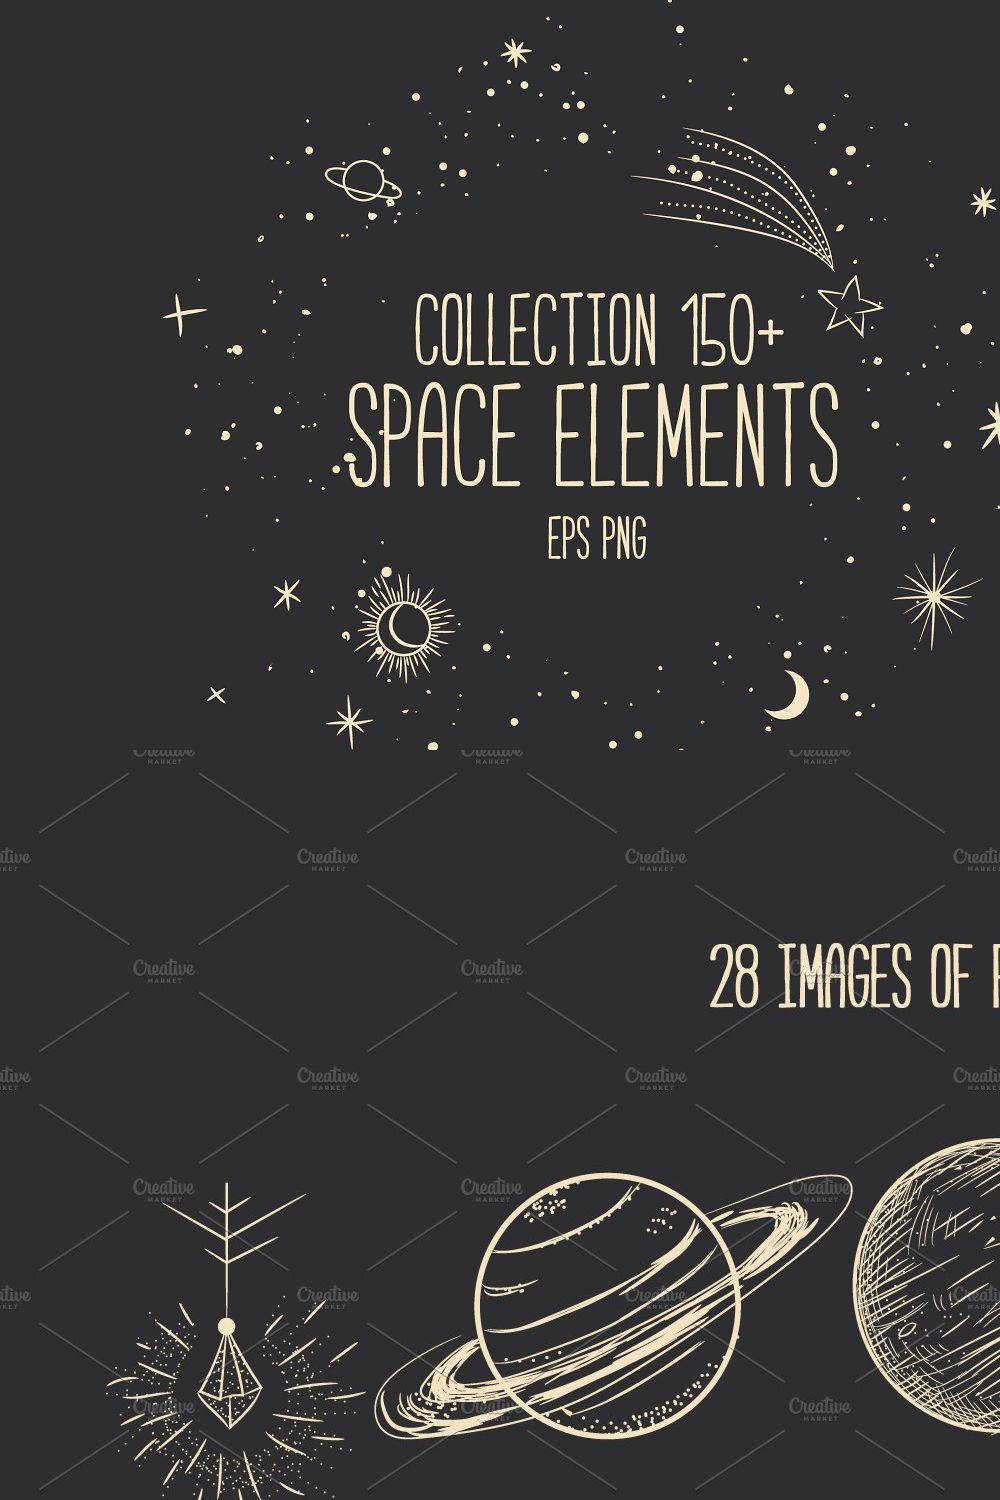 Space elements pinterest preview image.